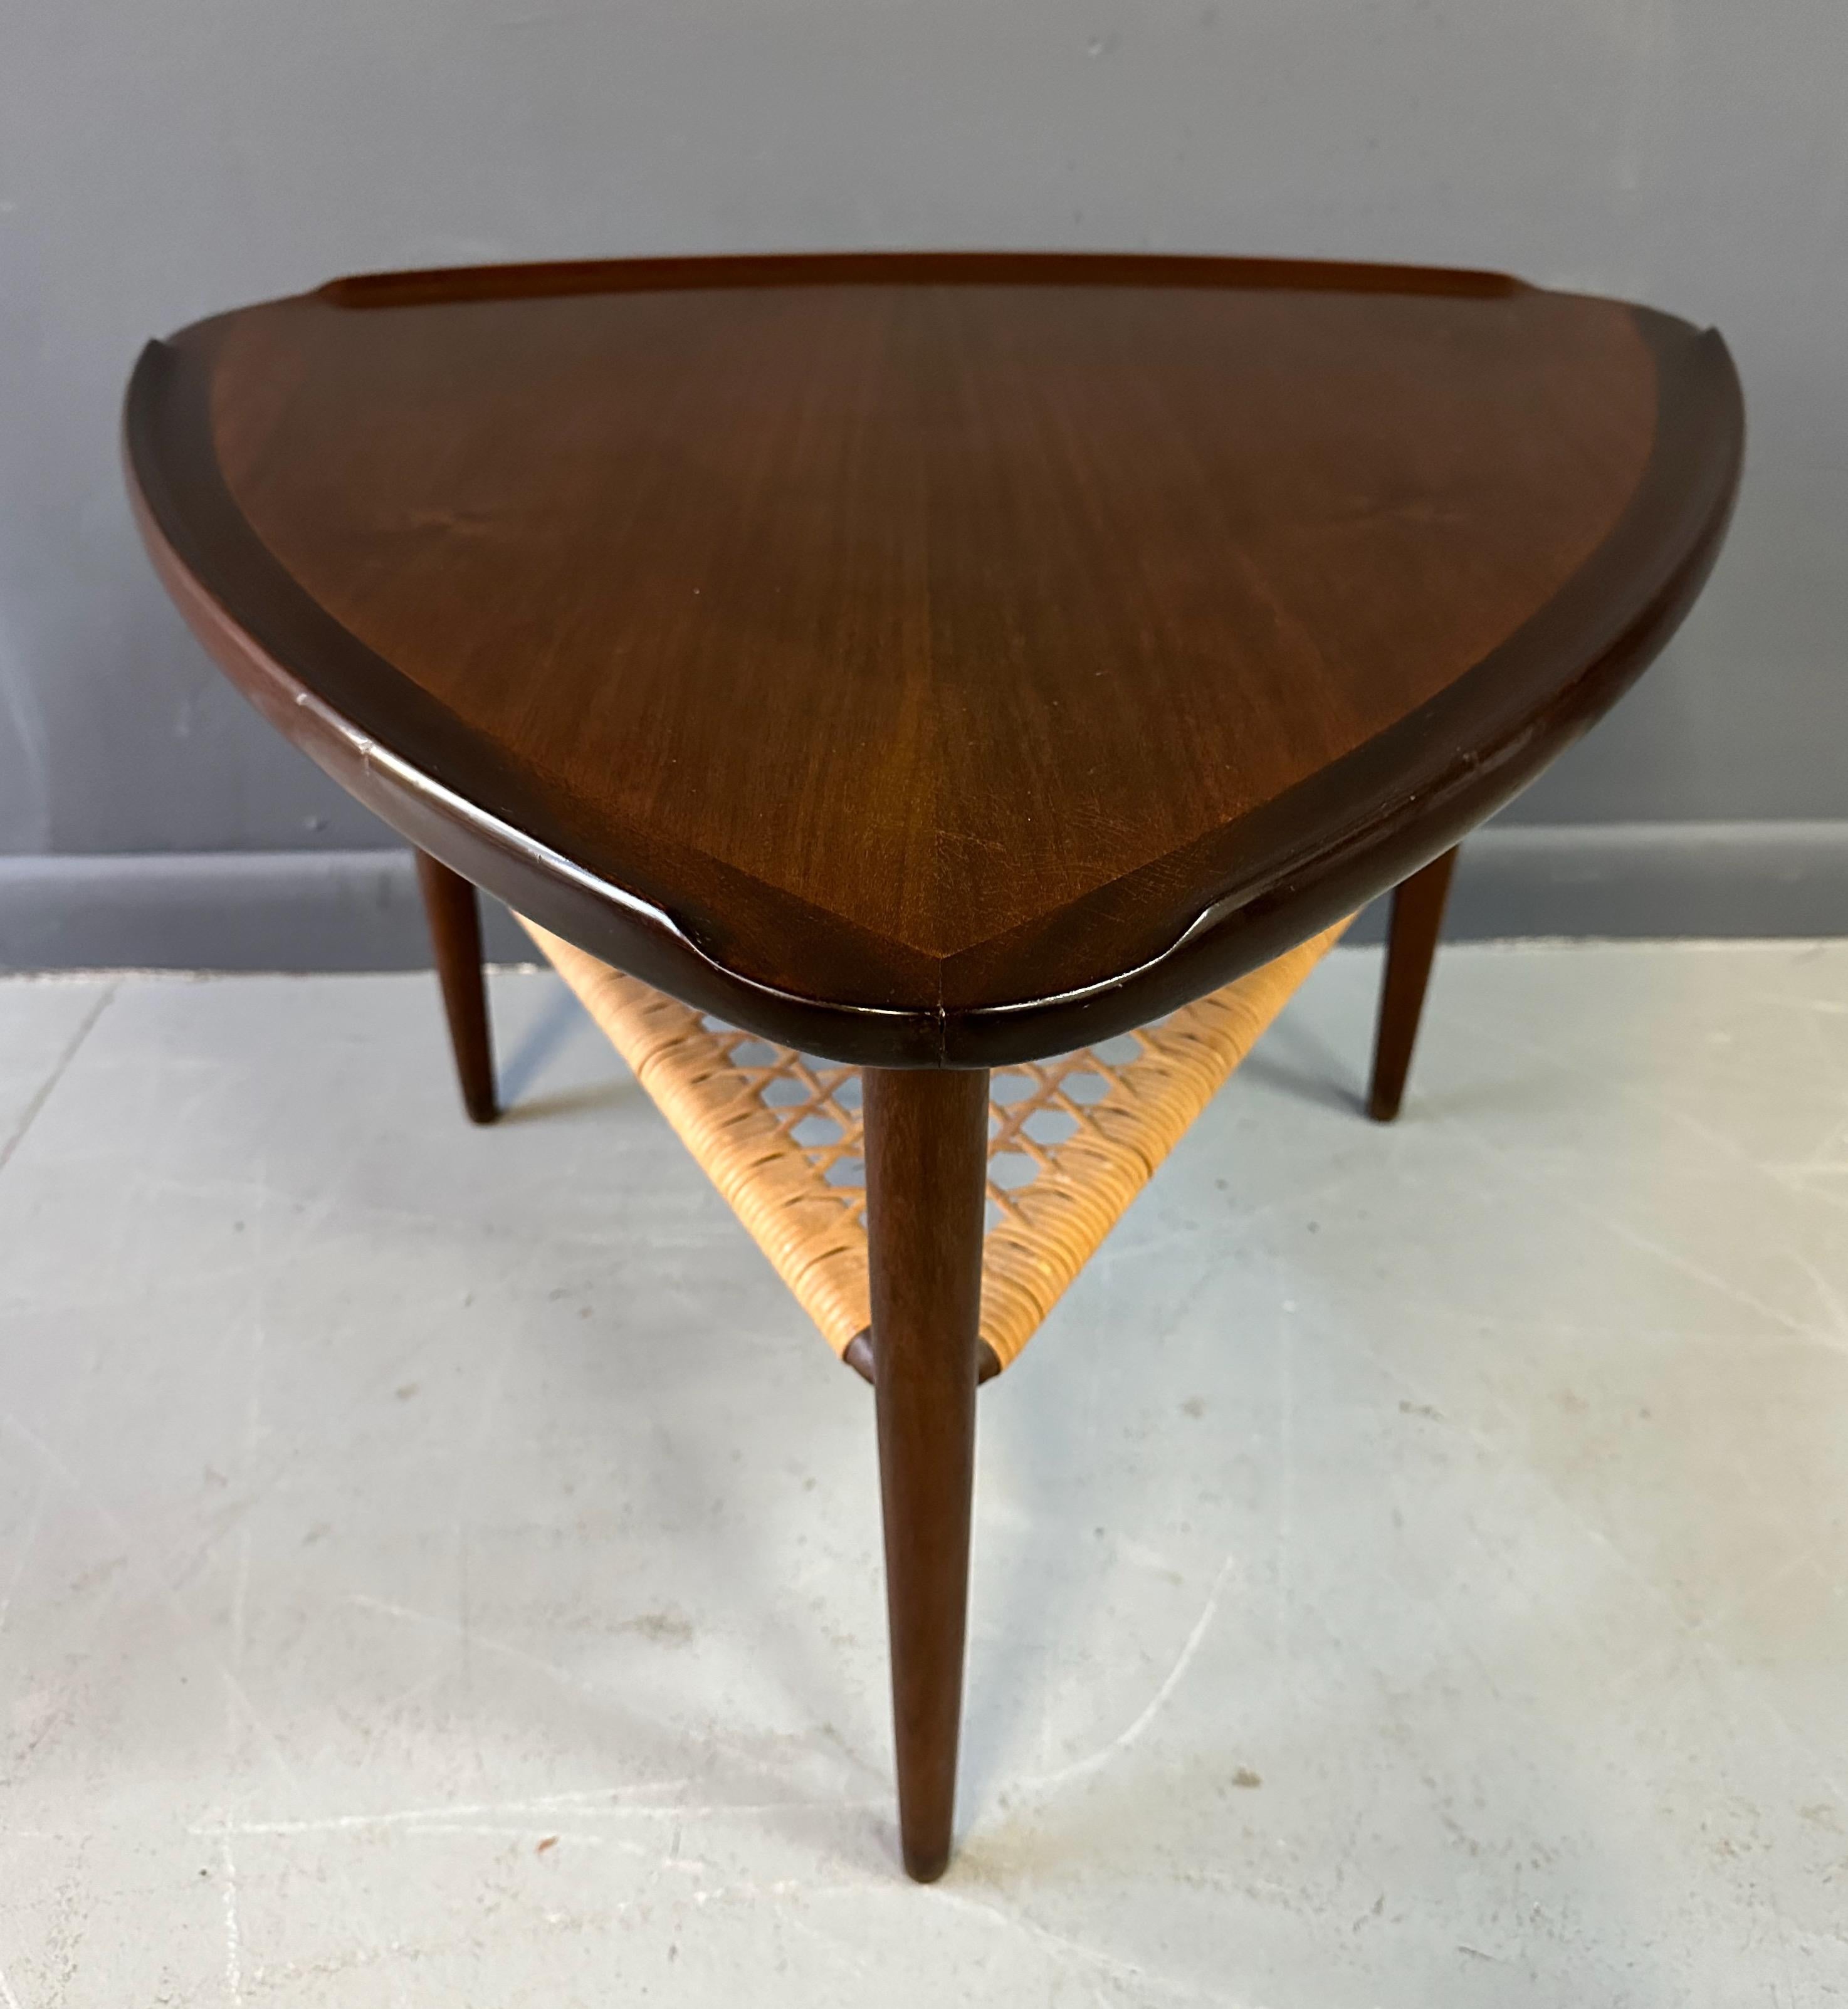 Mid Century triangular occasional guitar pick side table in walnut designed by Poul Jensen imported by Selig, Denmark. This piece features a unique raised edge top and lower tier magazine shelf made of woven cane.